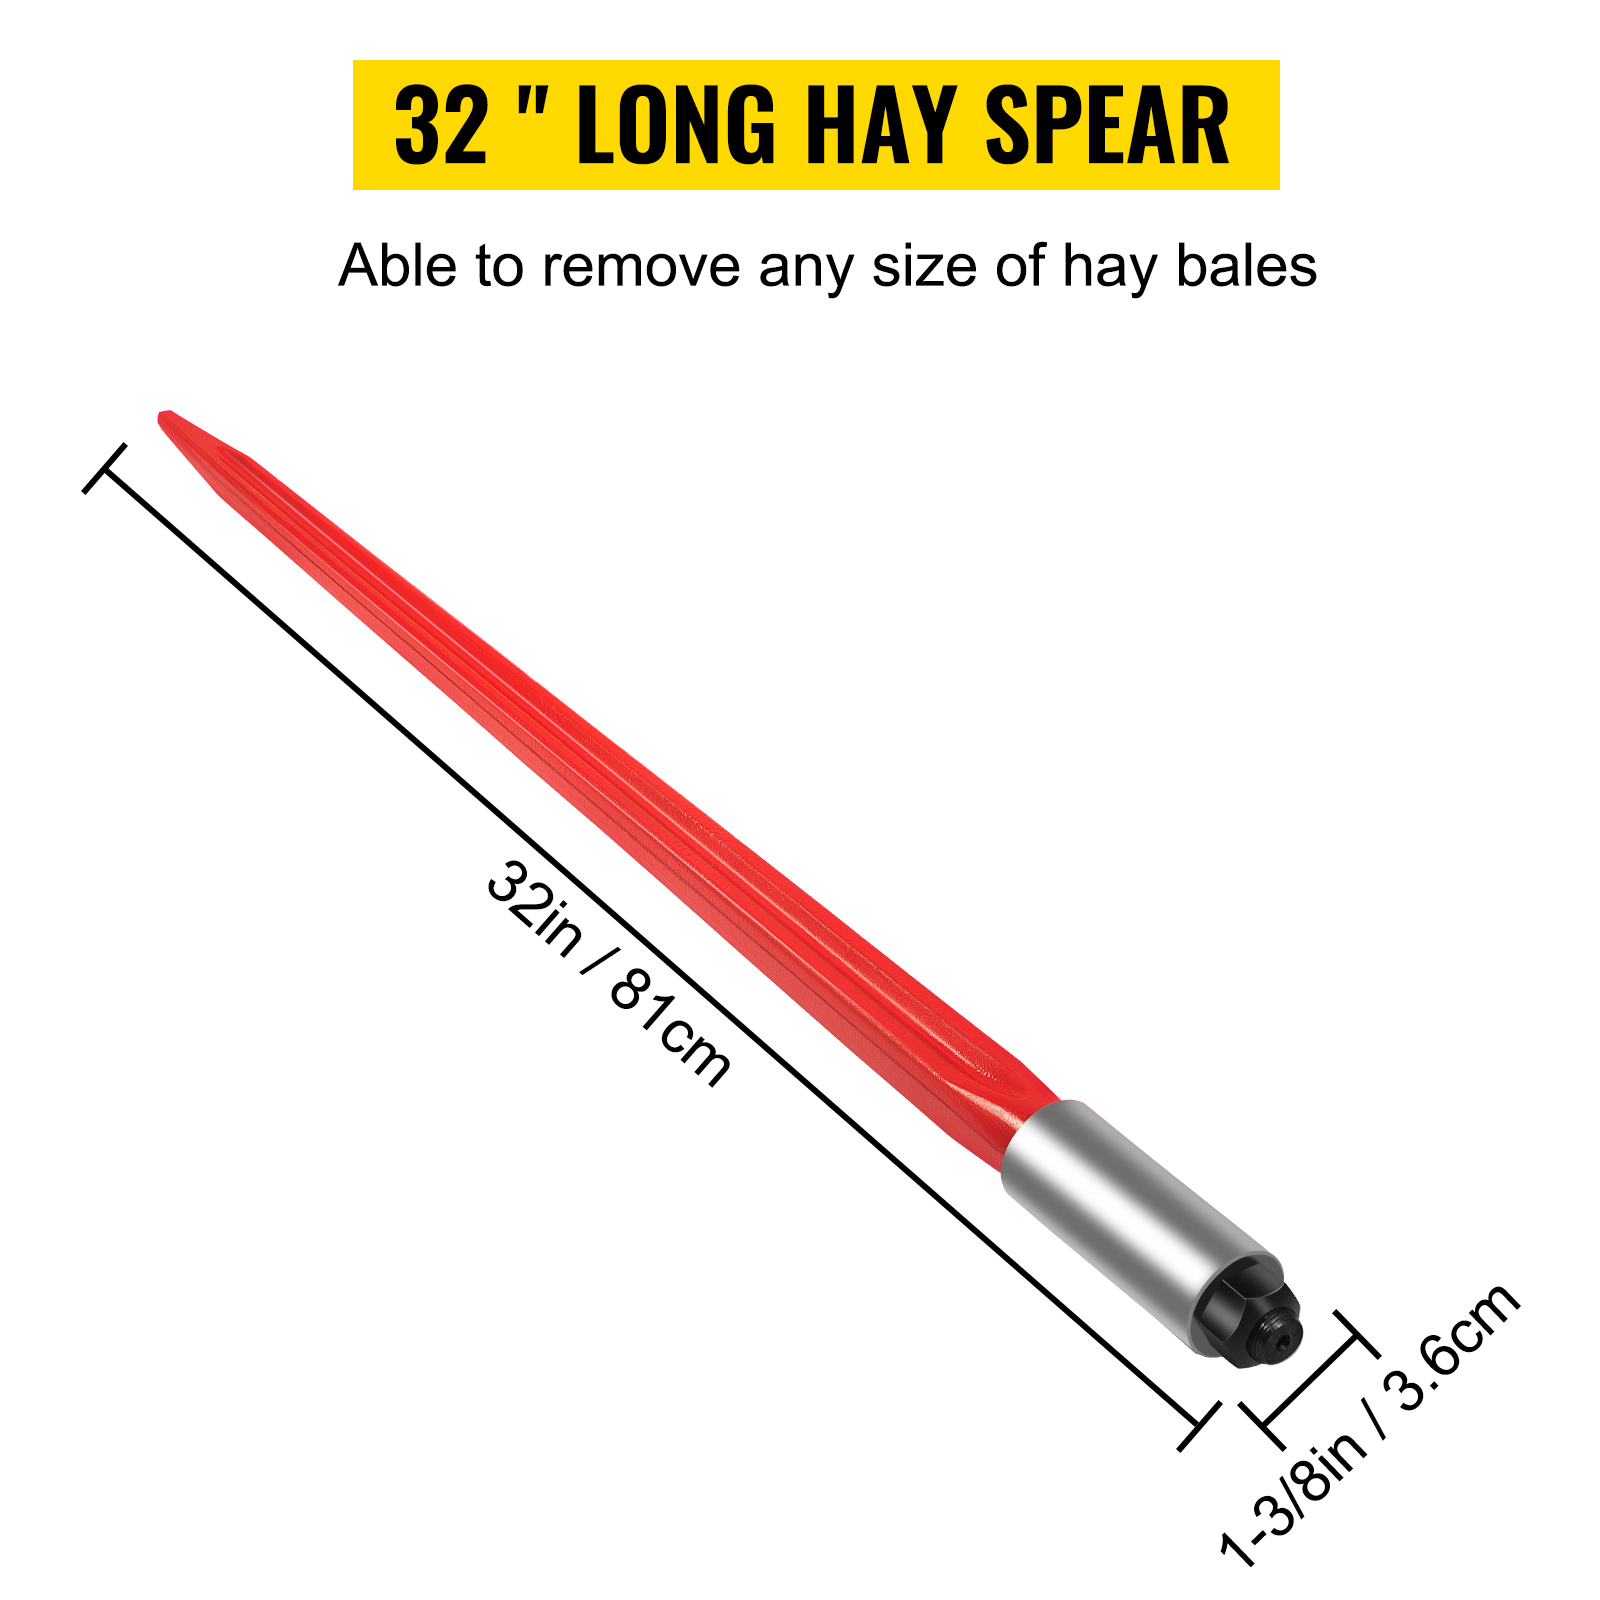 Hay Spear 32 Bale Spear 1350 lbs Capacity, Bale Spike Quick Attach Square  Hay Bale Spears